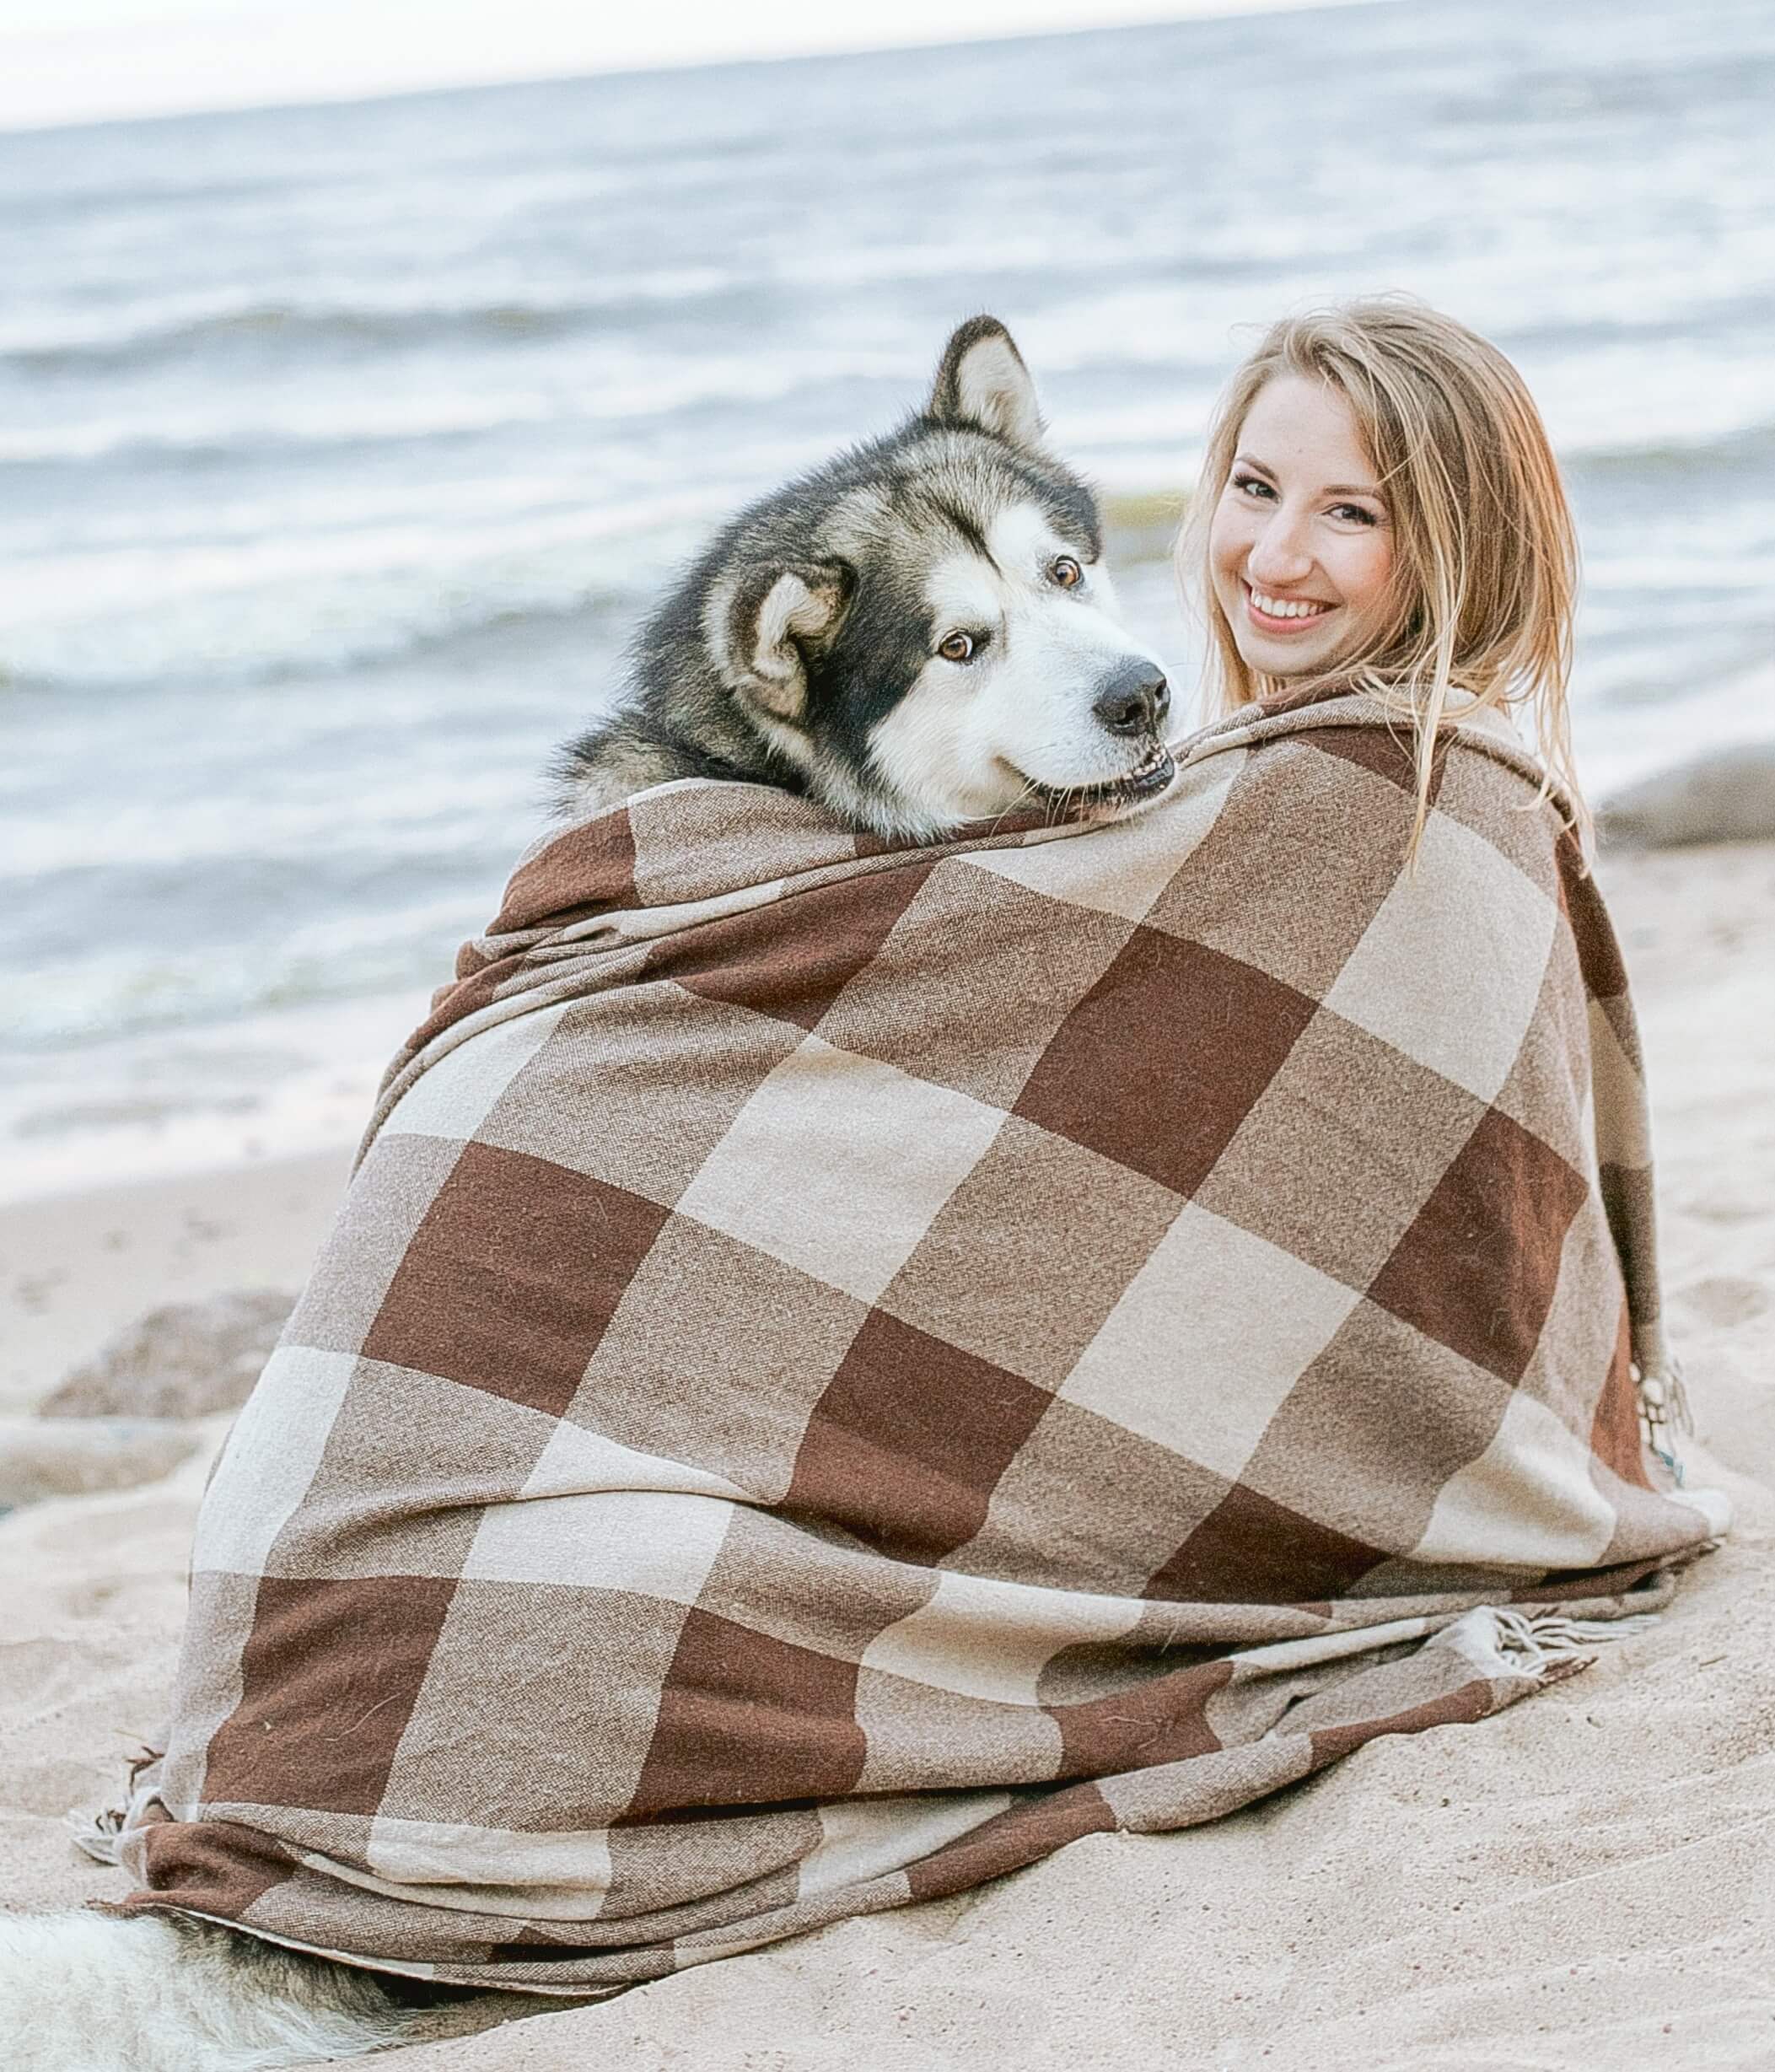 Dog and woman sitting on beach wrapped in a blanket